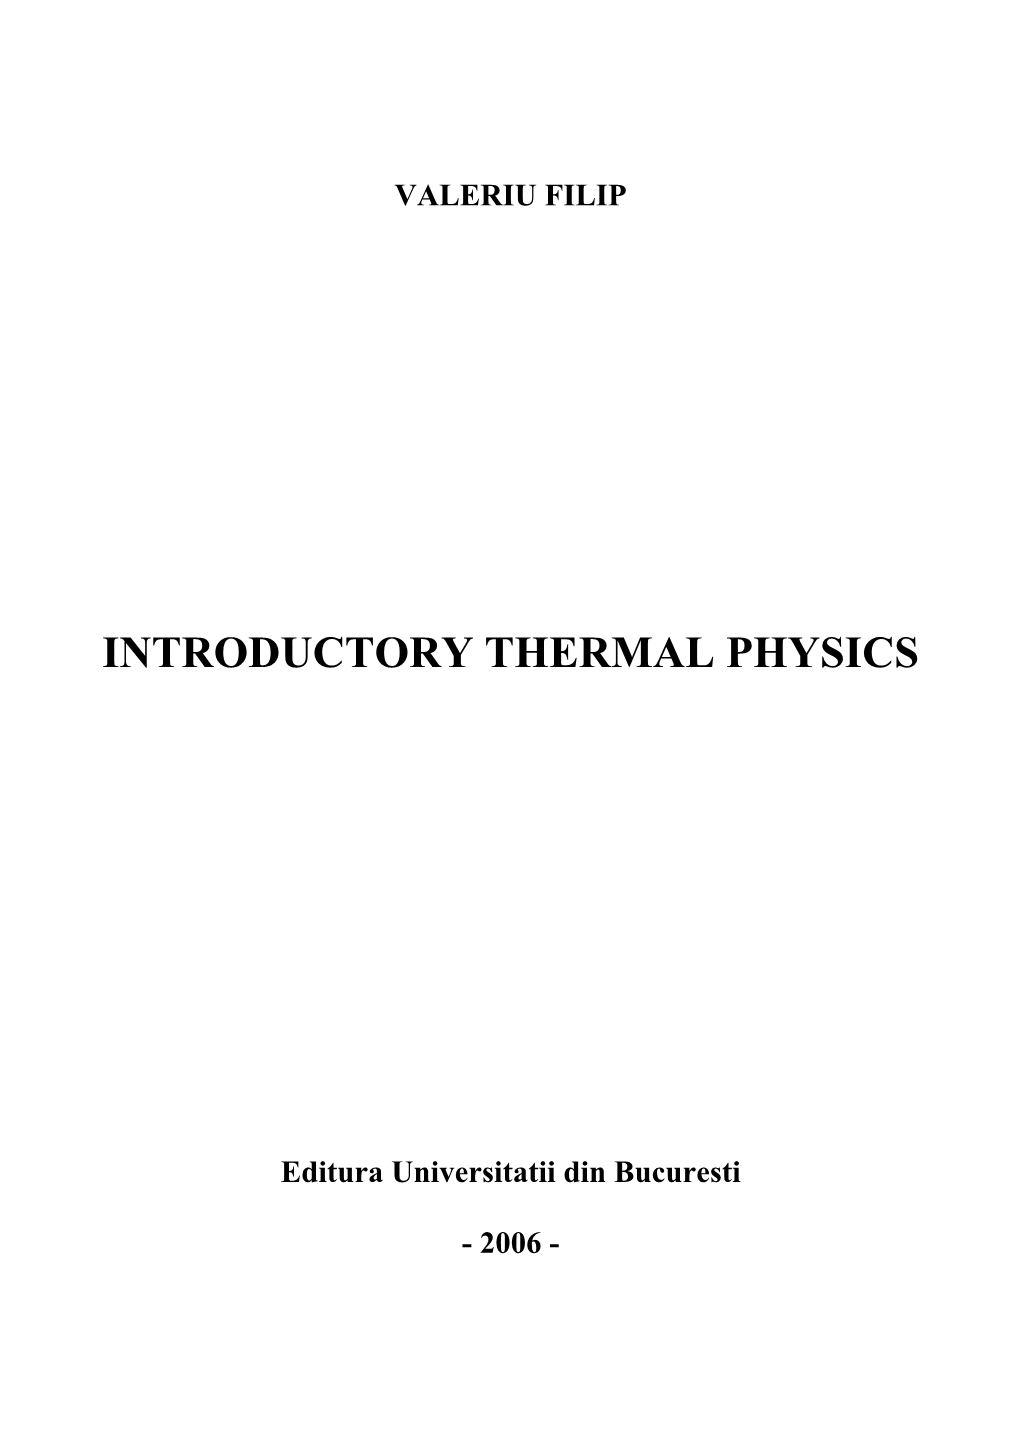 Introductory Thermal Physics